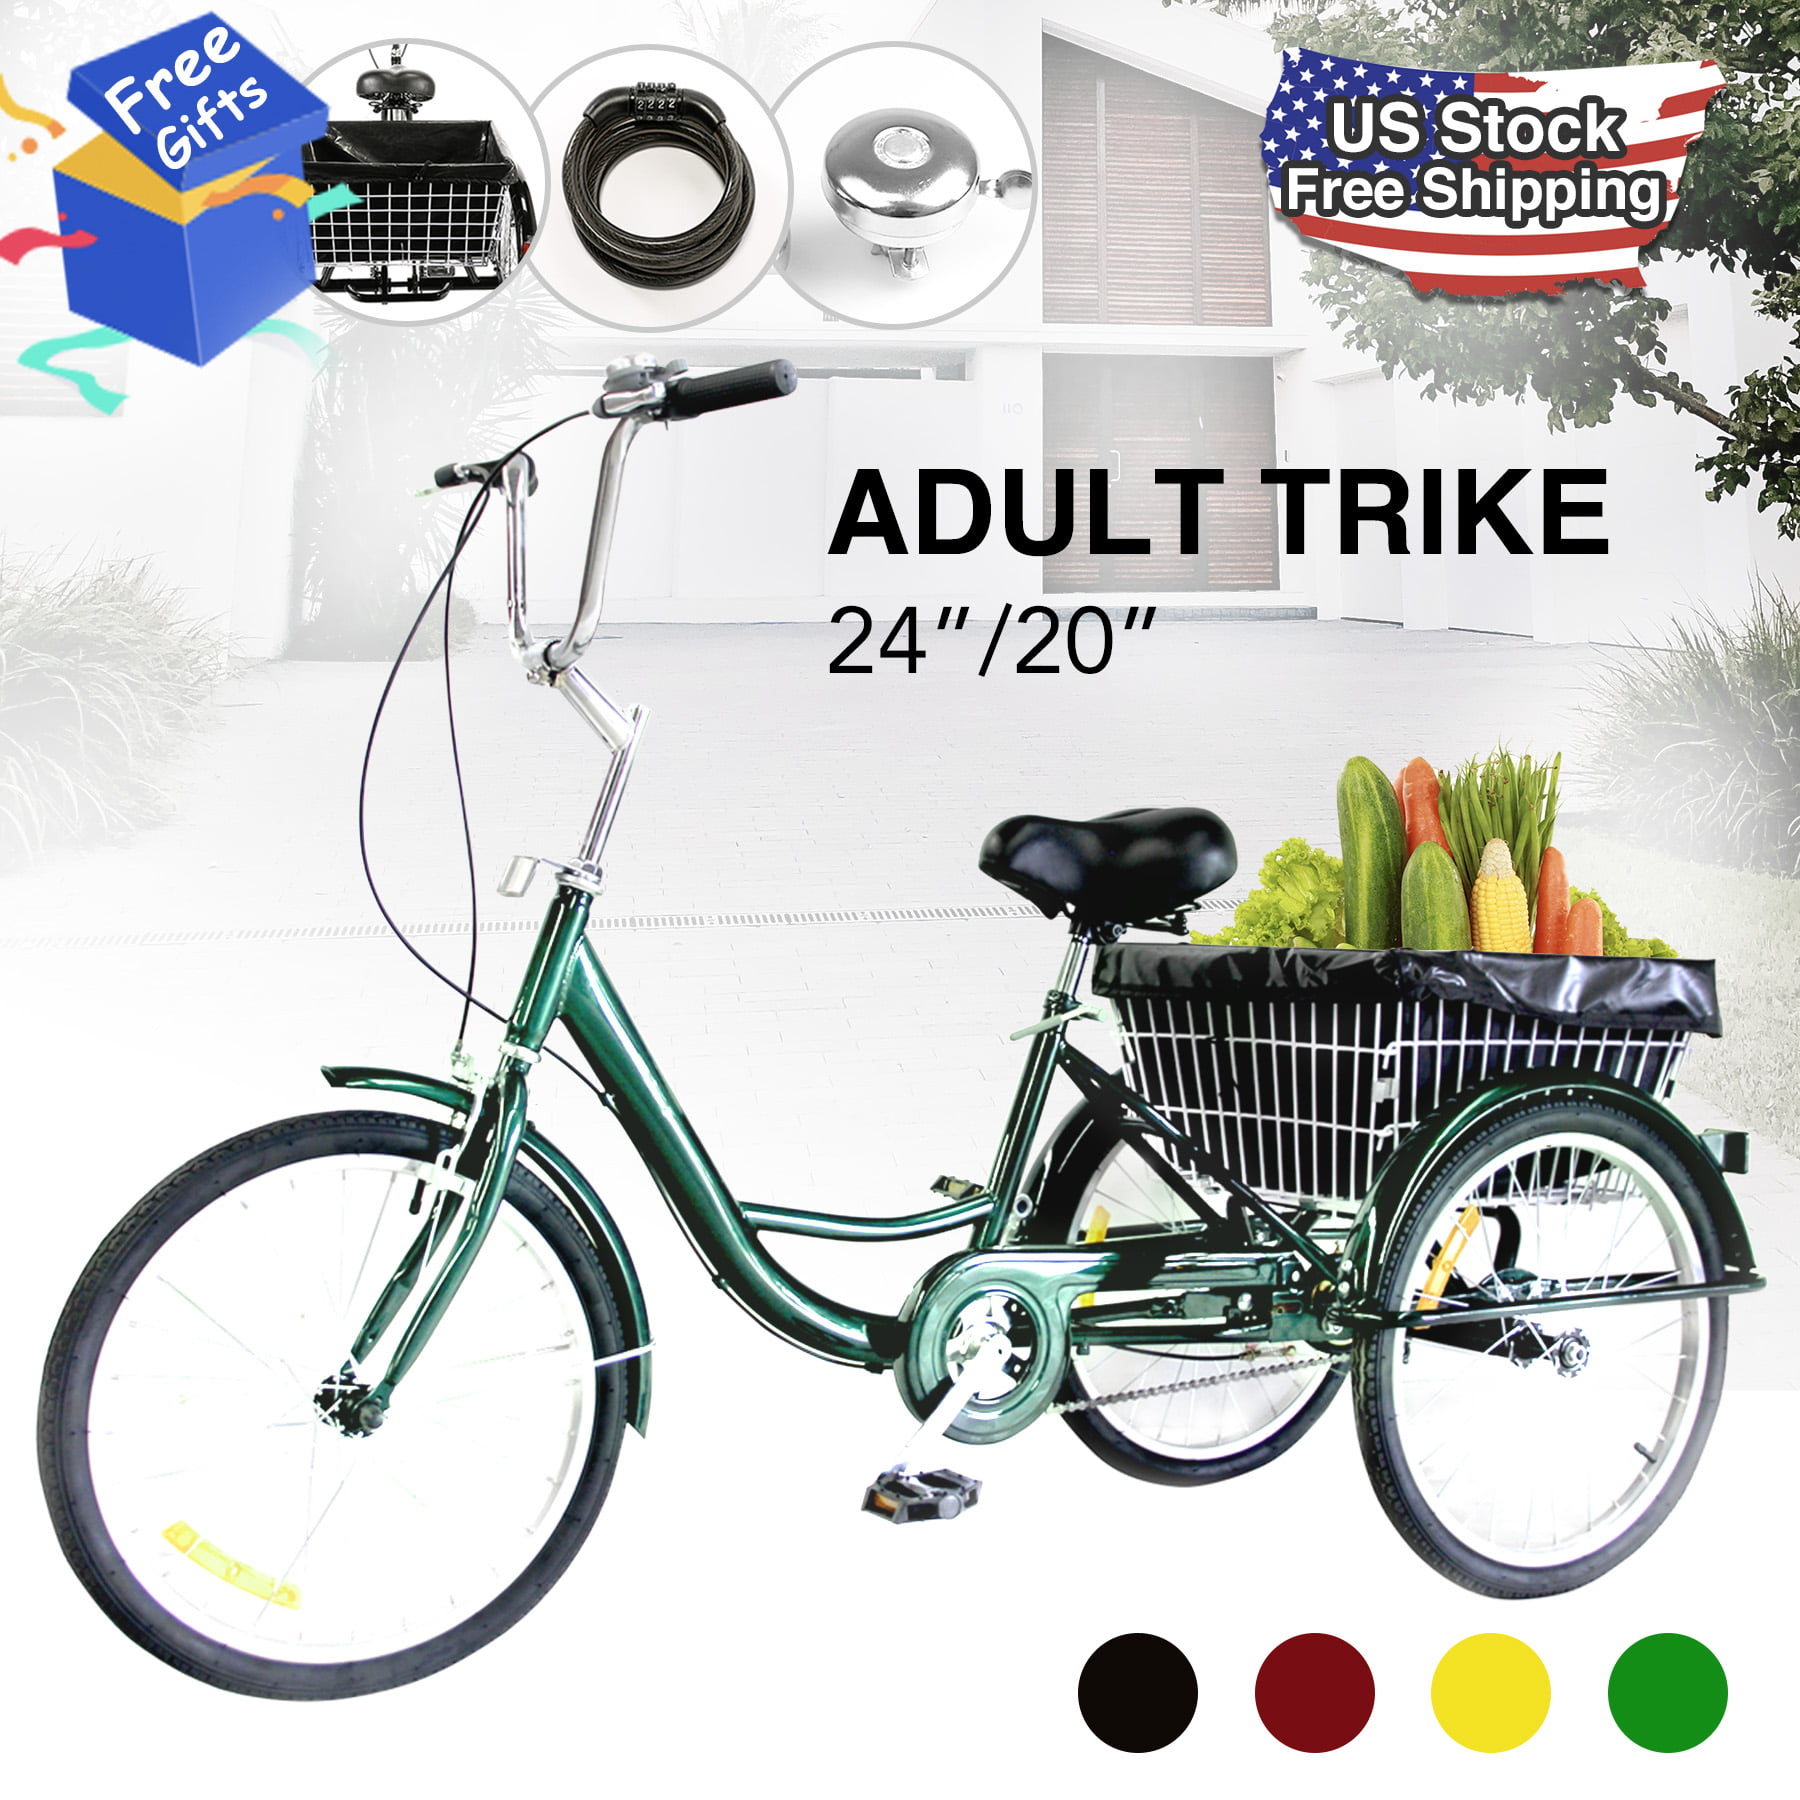 Shopping,Picnics Exercise Color : Red Color:Red Xinmier Adult Bicycle 20inch Adult Tricycle Three Wheel Cruiser Bike with Rear Seat and Seat Belt for Recreation 